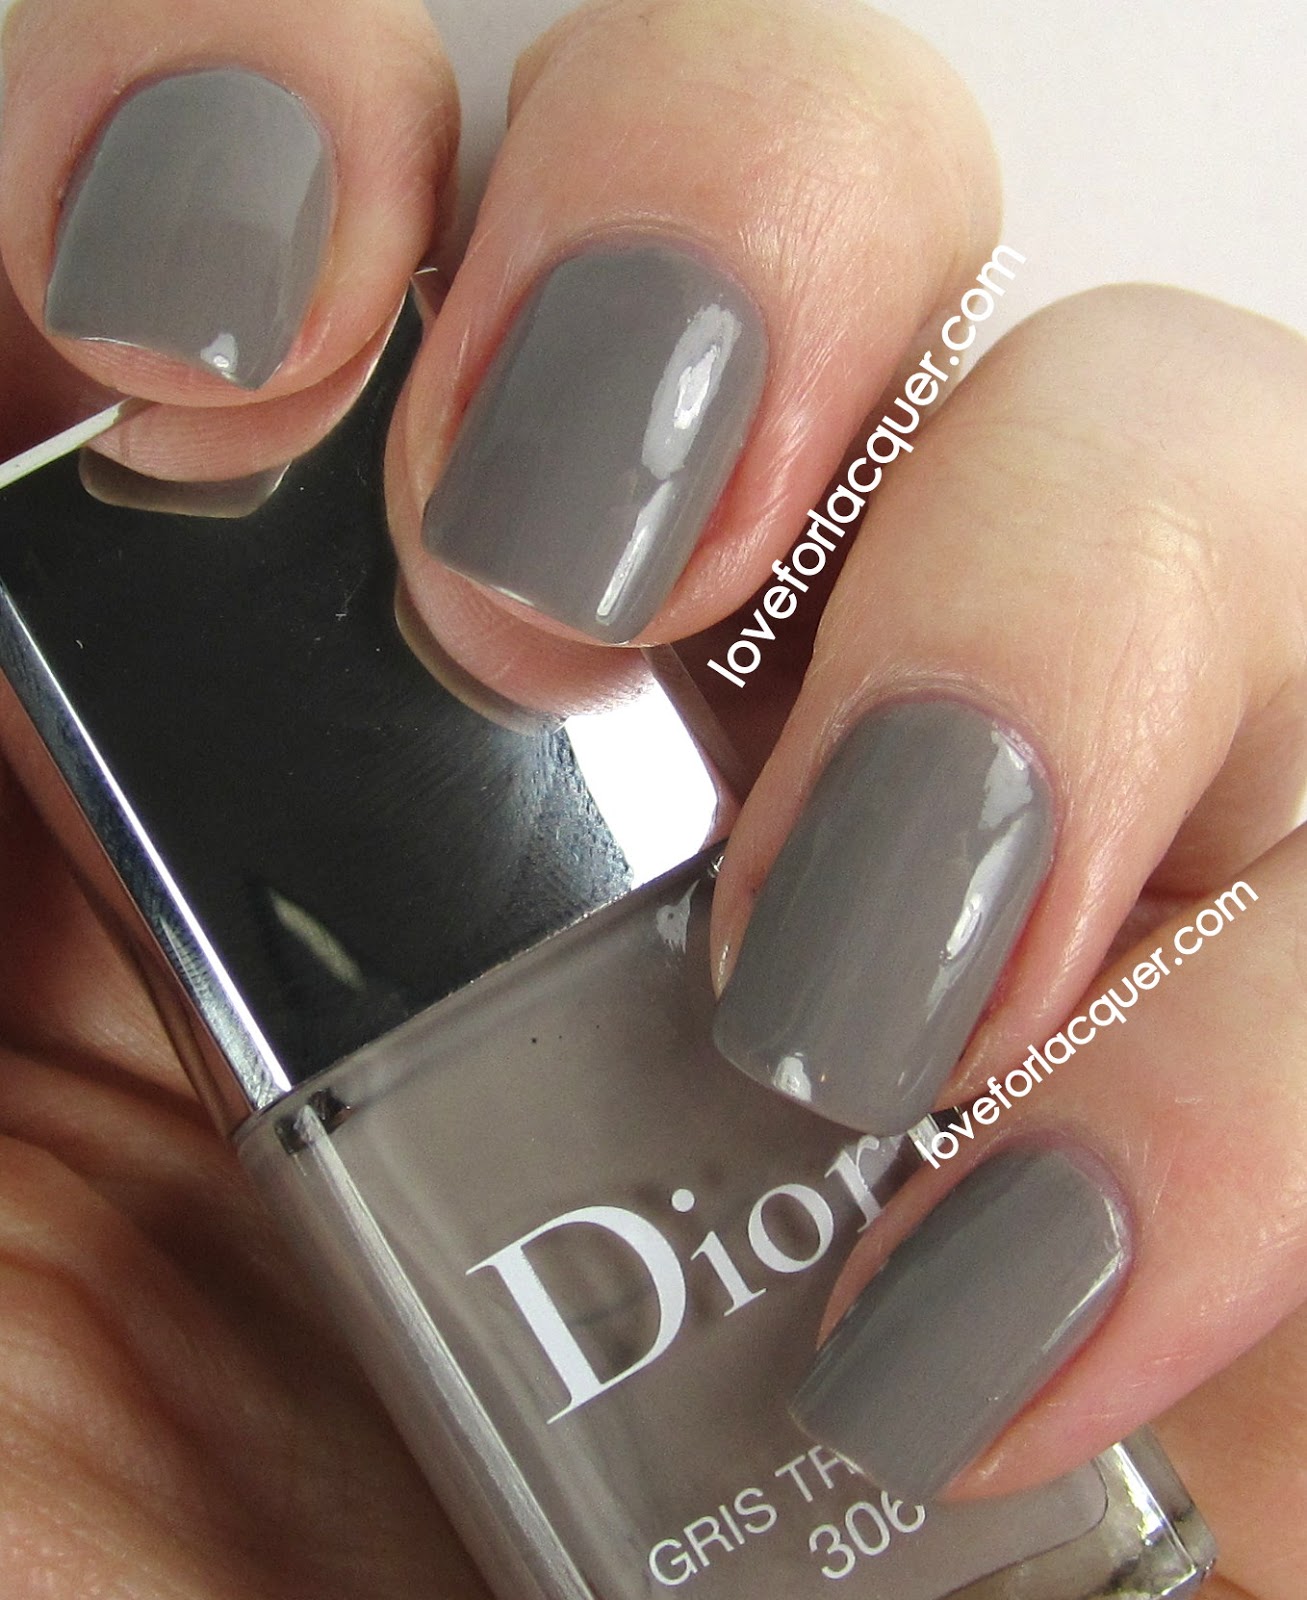 Dior Vernis In 306 Gris Trianon & 355 Rosy Bow